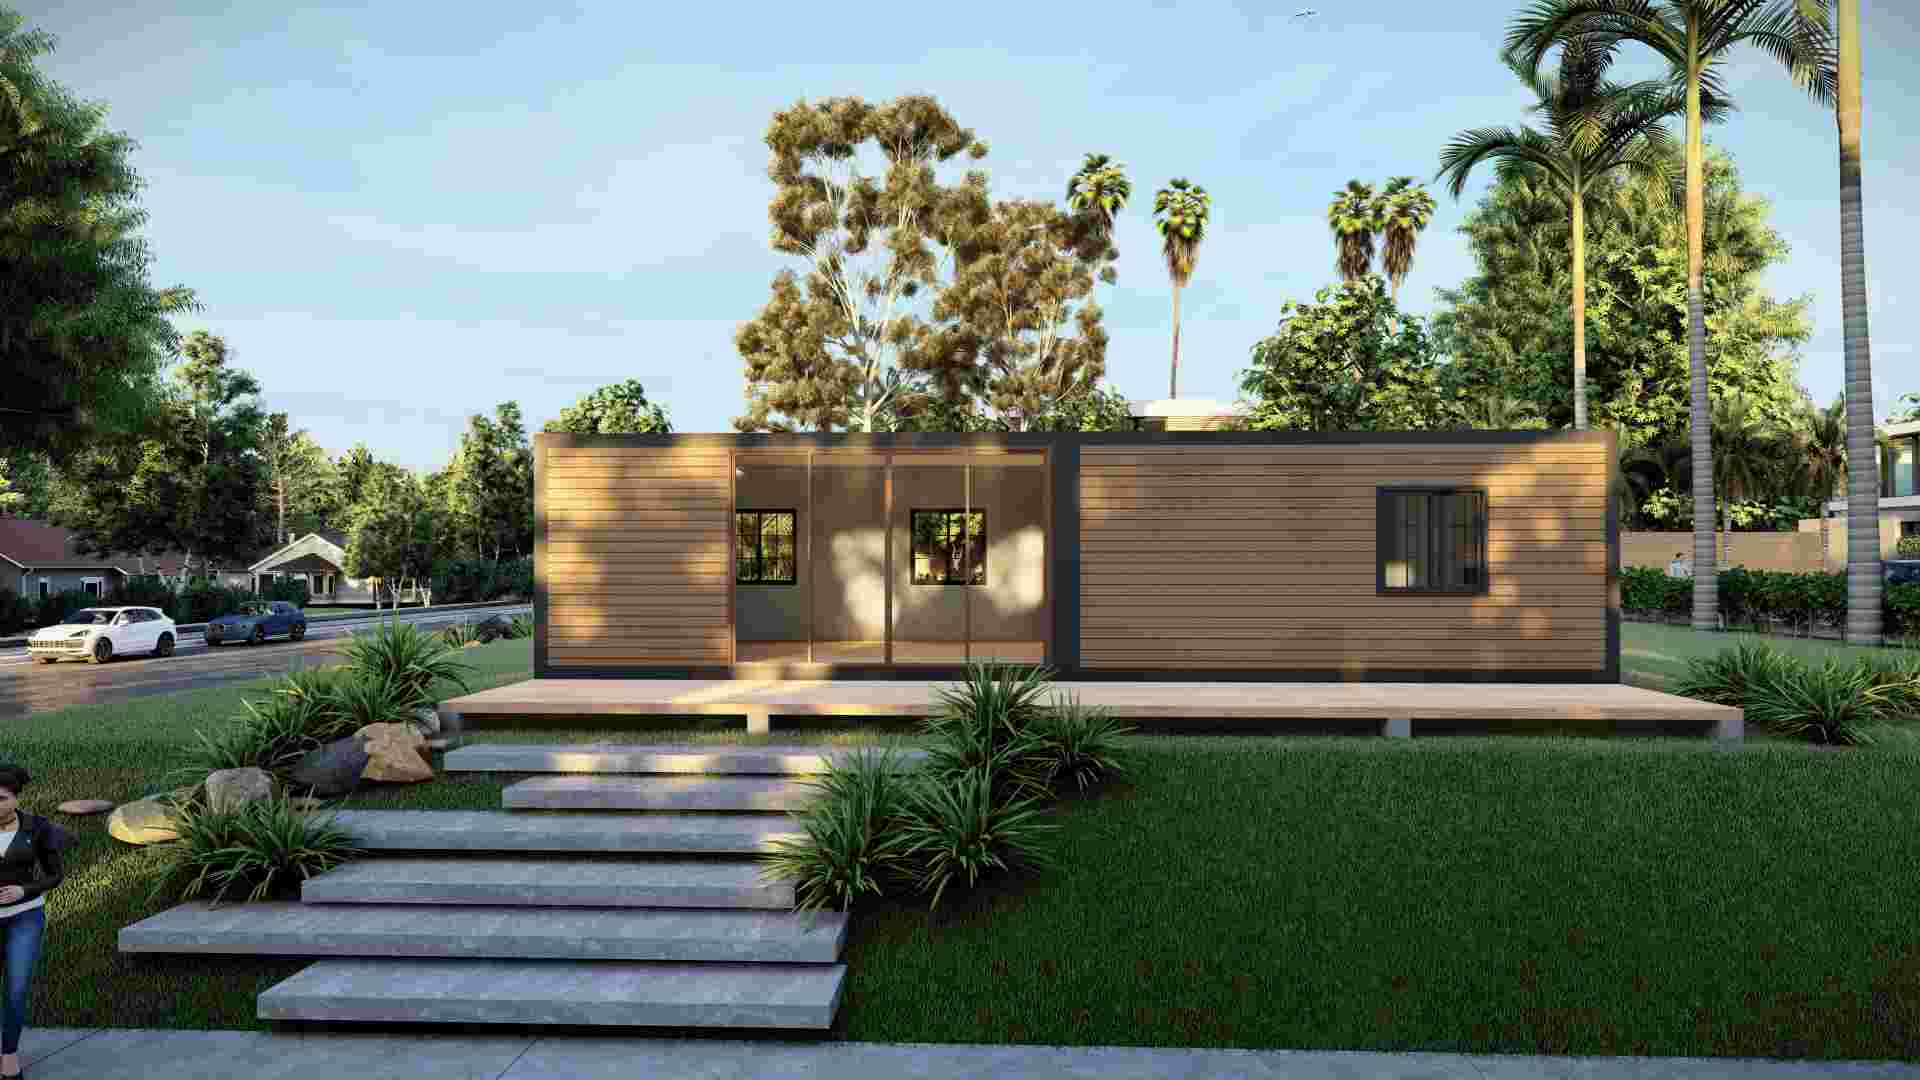 Low Cost Flat Pack Prefab Building Quick Build Modular Home-1X01